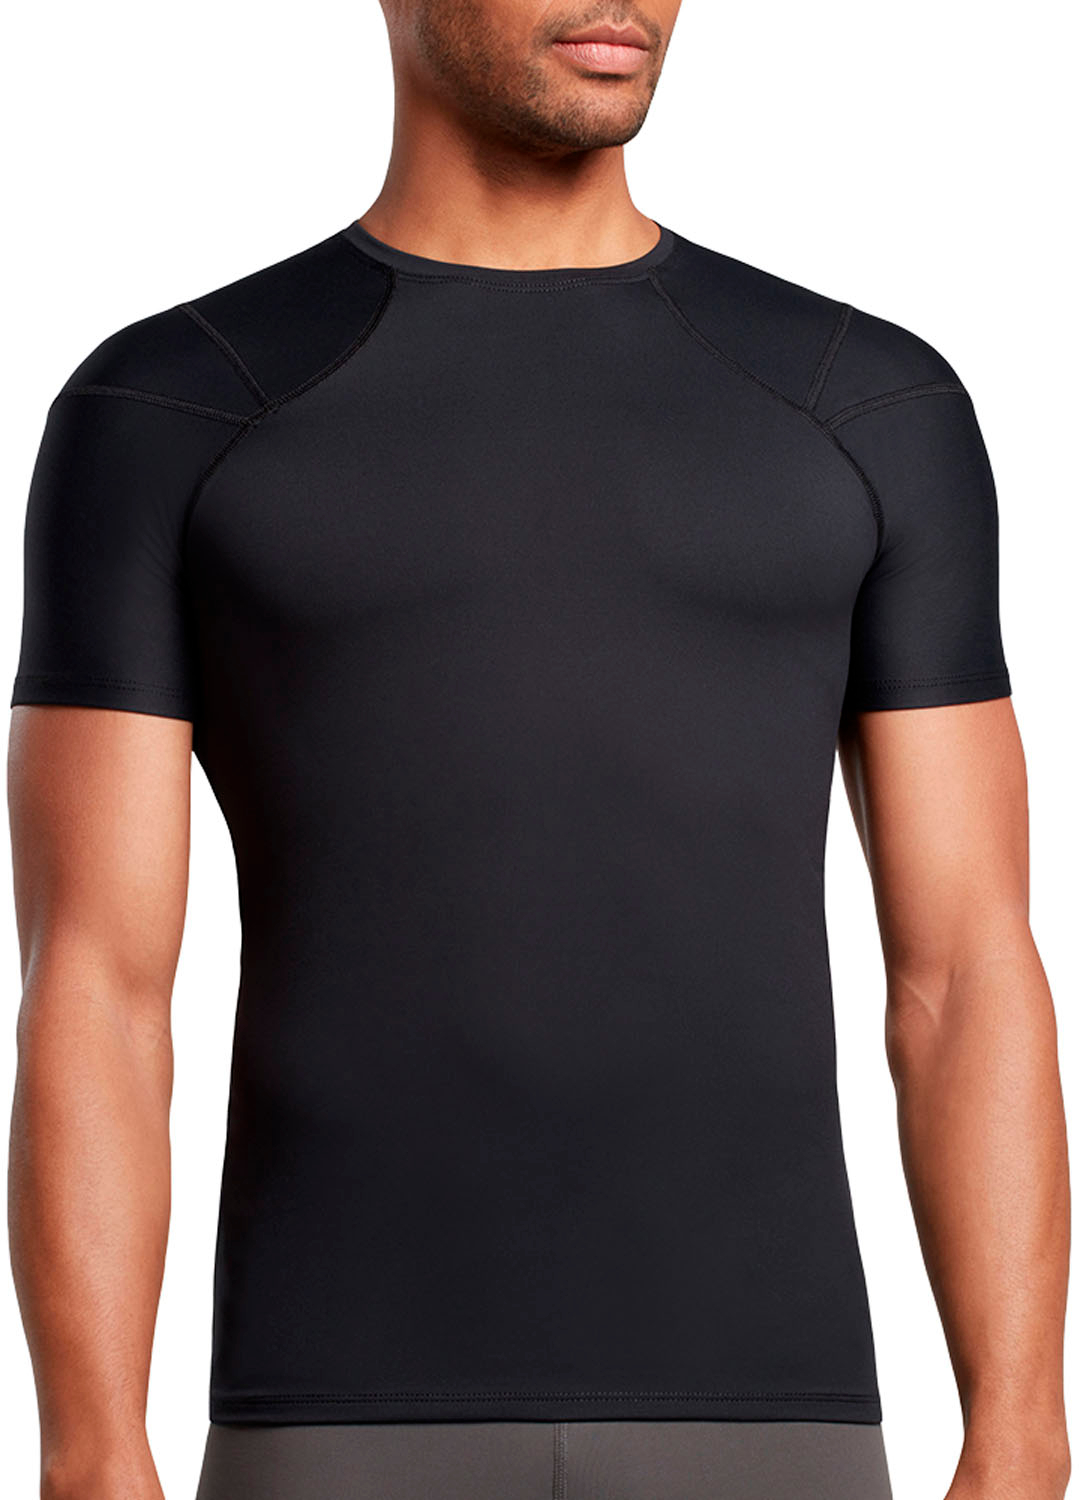 Looking for a last-minute gift idea? Check out our best-selling shoulder  support shirt. TommieCopper.com